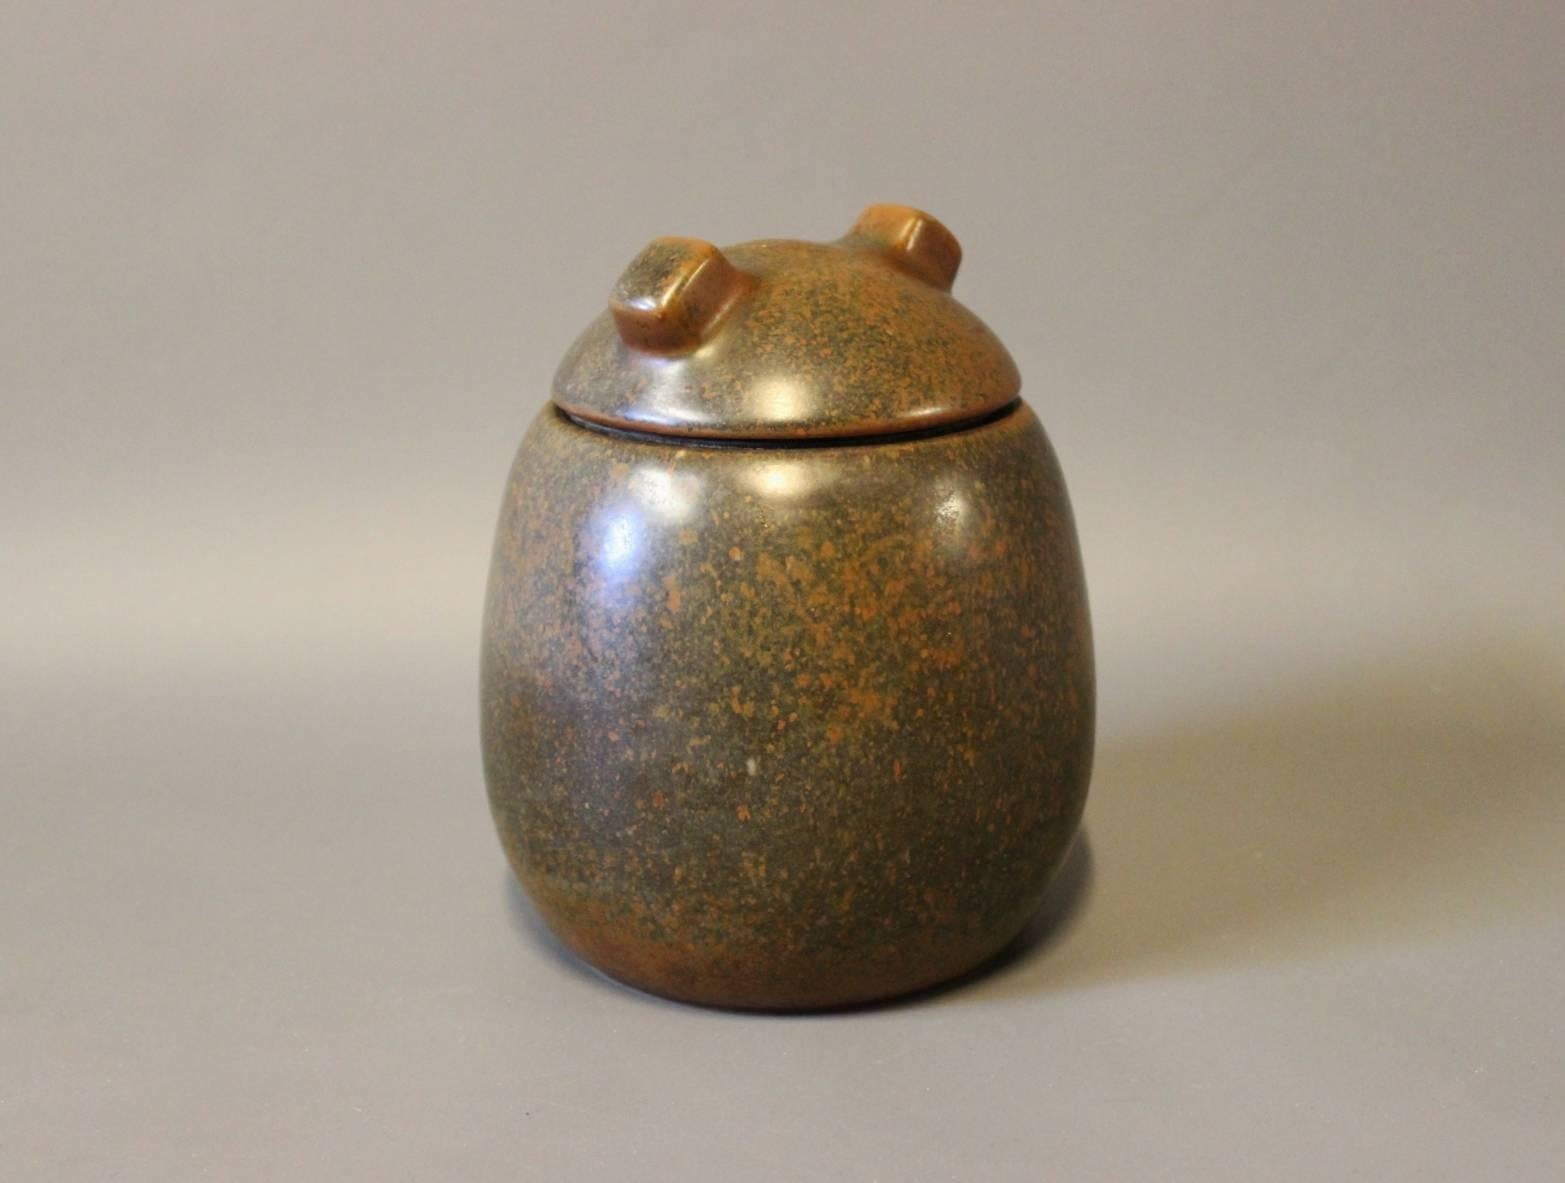 Ceramic lidded jar with dark brown glaze designed by Erik Rahr for Saxbo. The jar is numbered 28 and in great vintage condition.